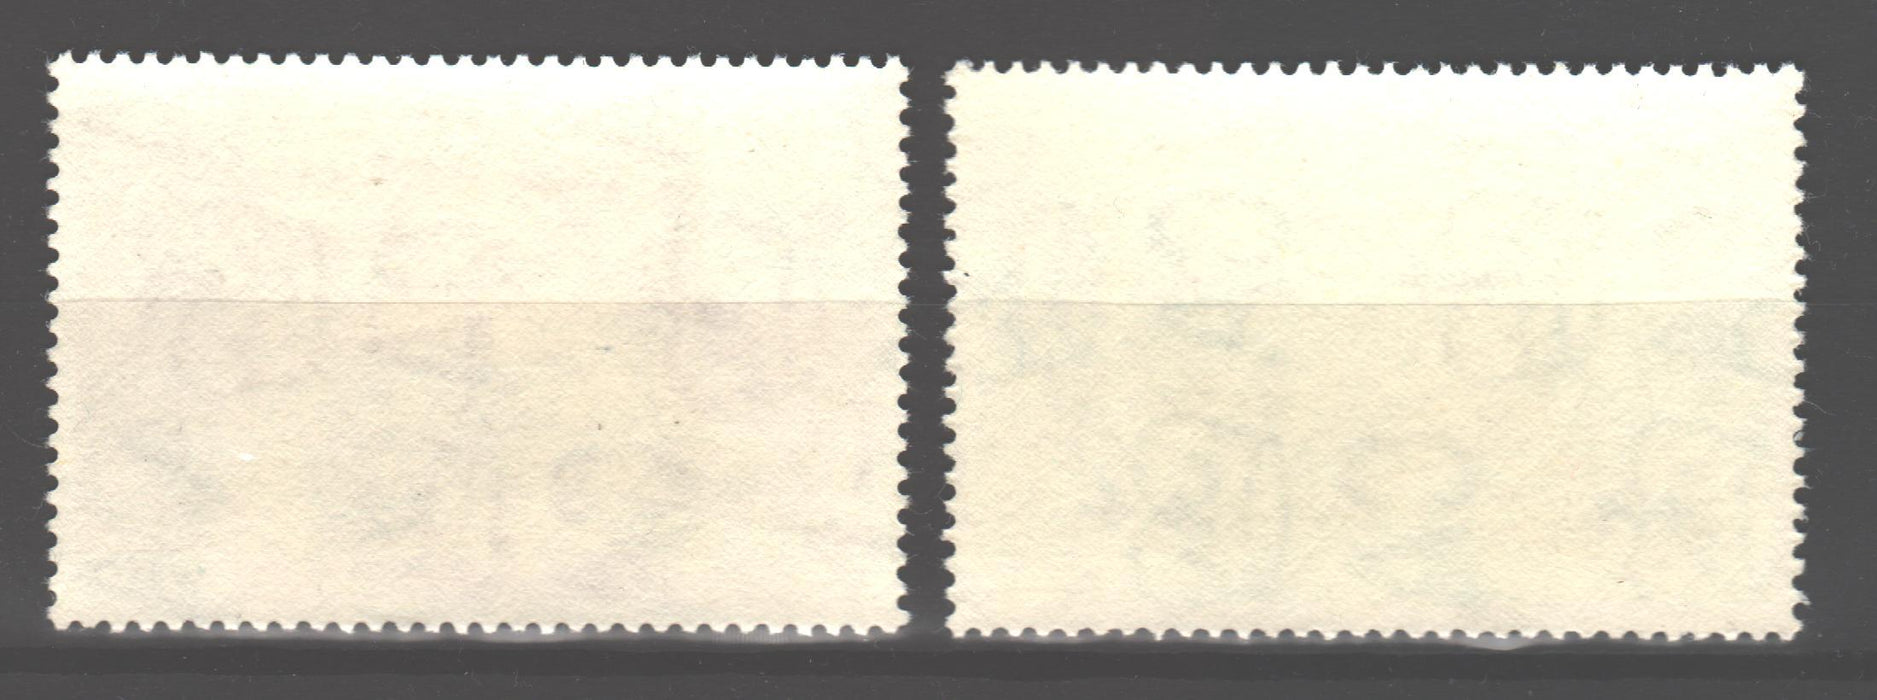 Seychelles 1966 WHO Headquarters Issue Scott #228-229 c.v. 1.25$ - (TIP A)-Stamps Mall